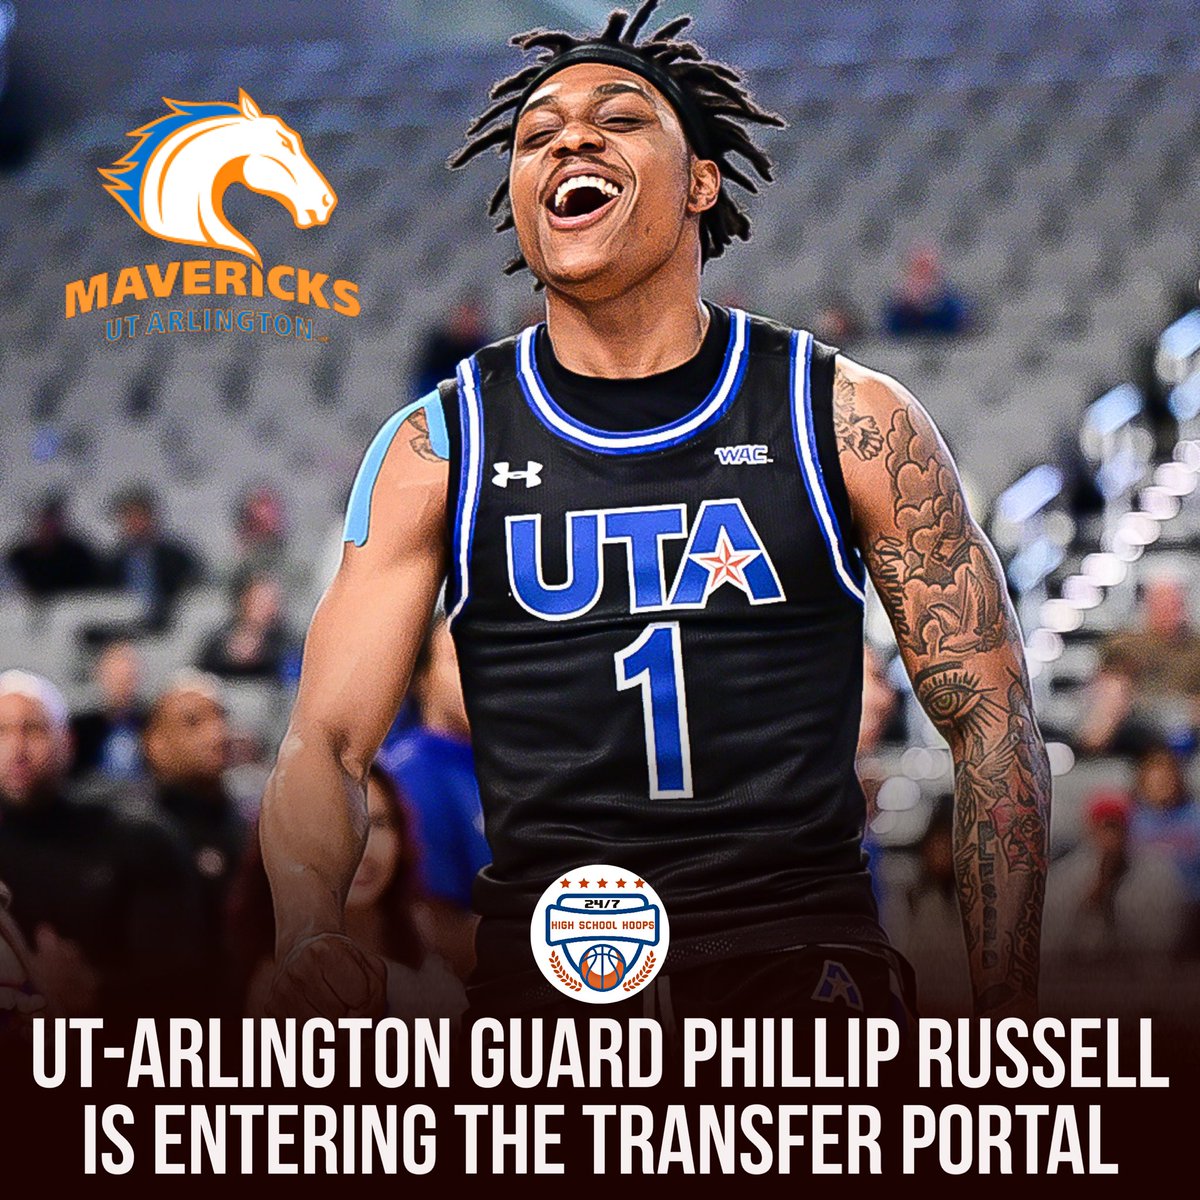 NEWS: UT-Arlington guard Philip Russell is entering the transfer portal, per source. Russell began his career playing one season at St. Louis before playing two at SEMO and then one at UTA. He’s a native of St. Louis, Missouri. He averaged 14.9PPG, 4.4APG and 1.9RPG this